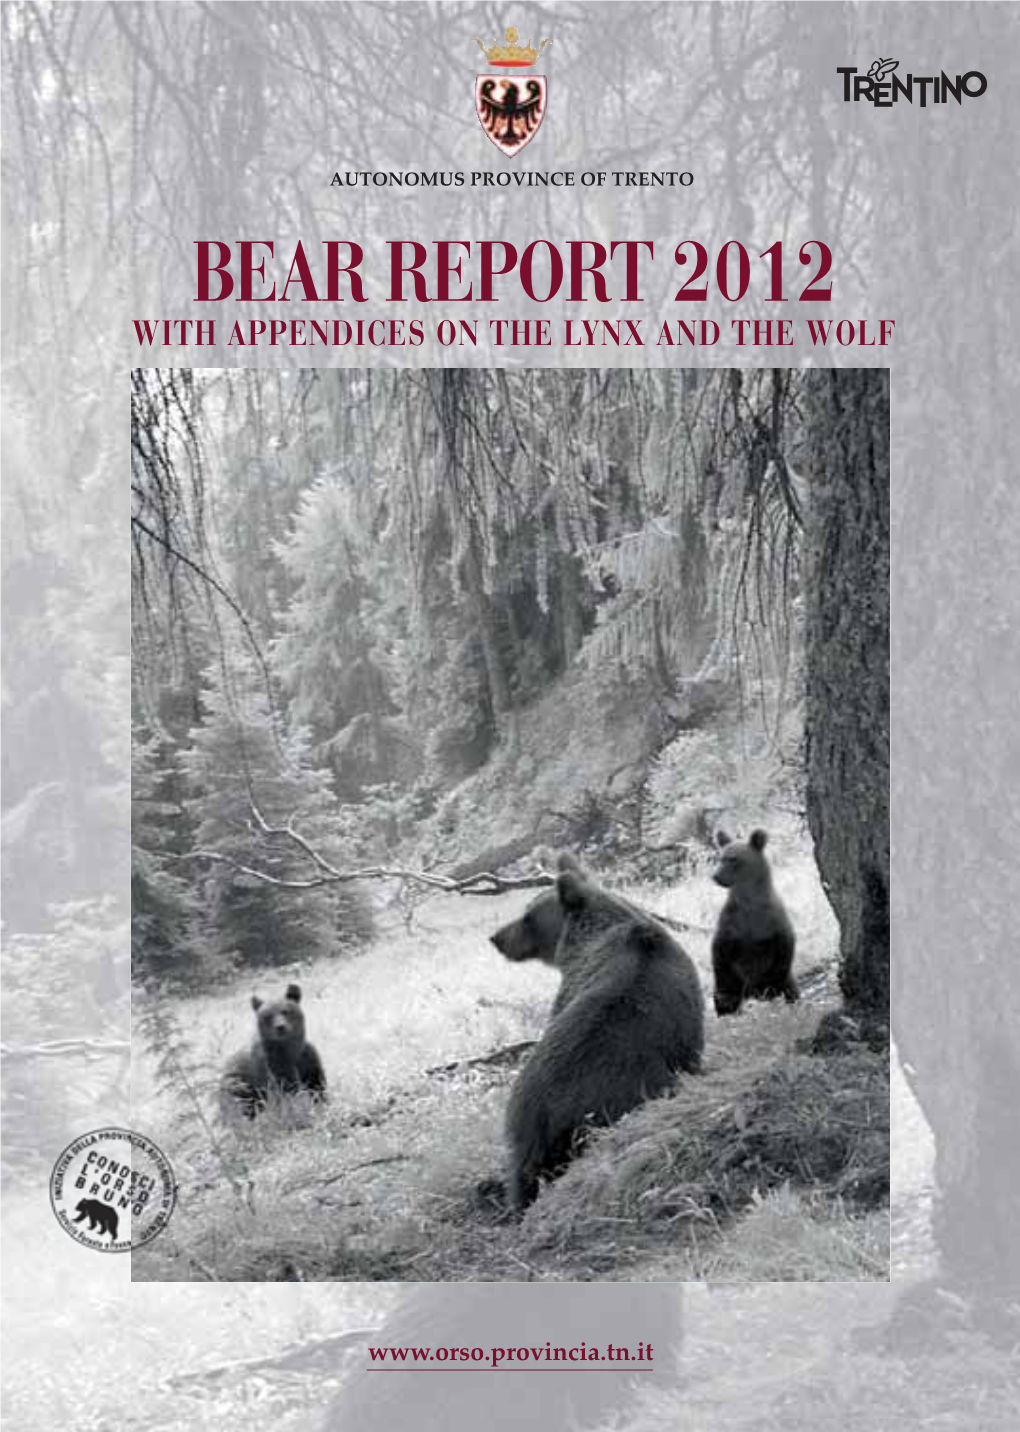 Bear Report 2012 with Appendices on the Lynx and the Wolf